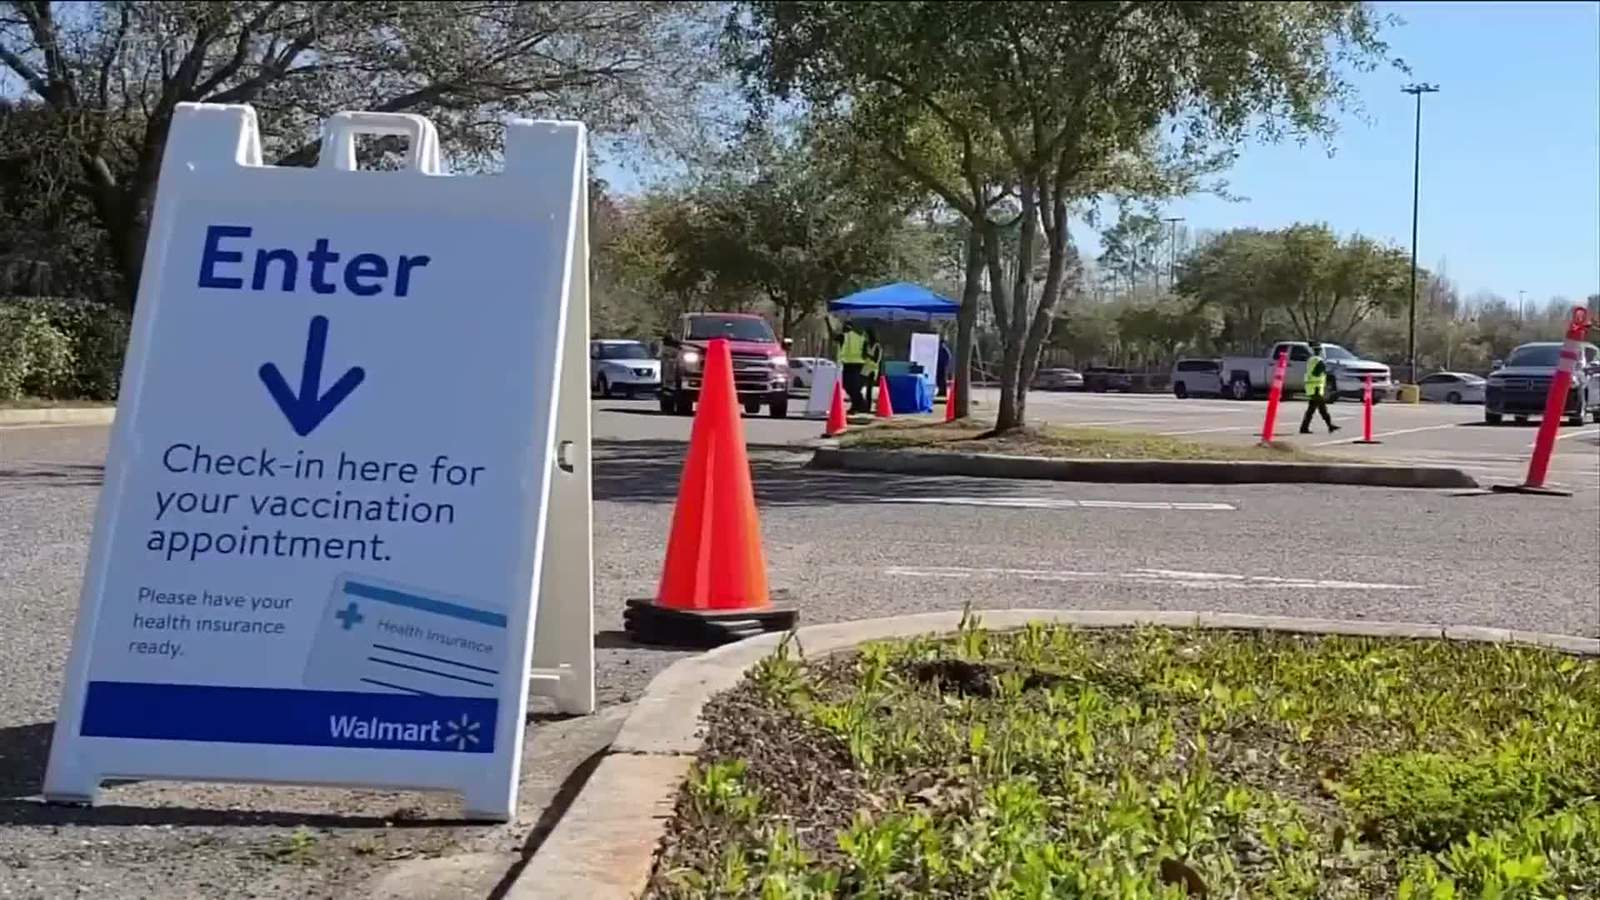 Walmart’s move from Lem Turner Road from Modern vaccine to Pfizer causes confusion for some seniors